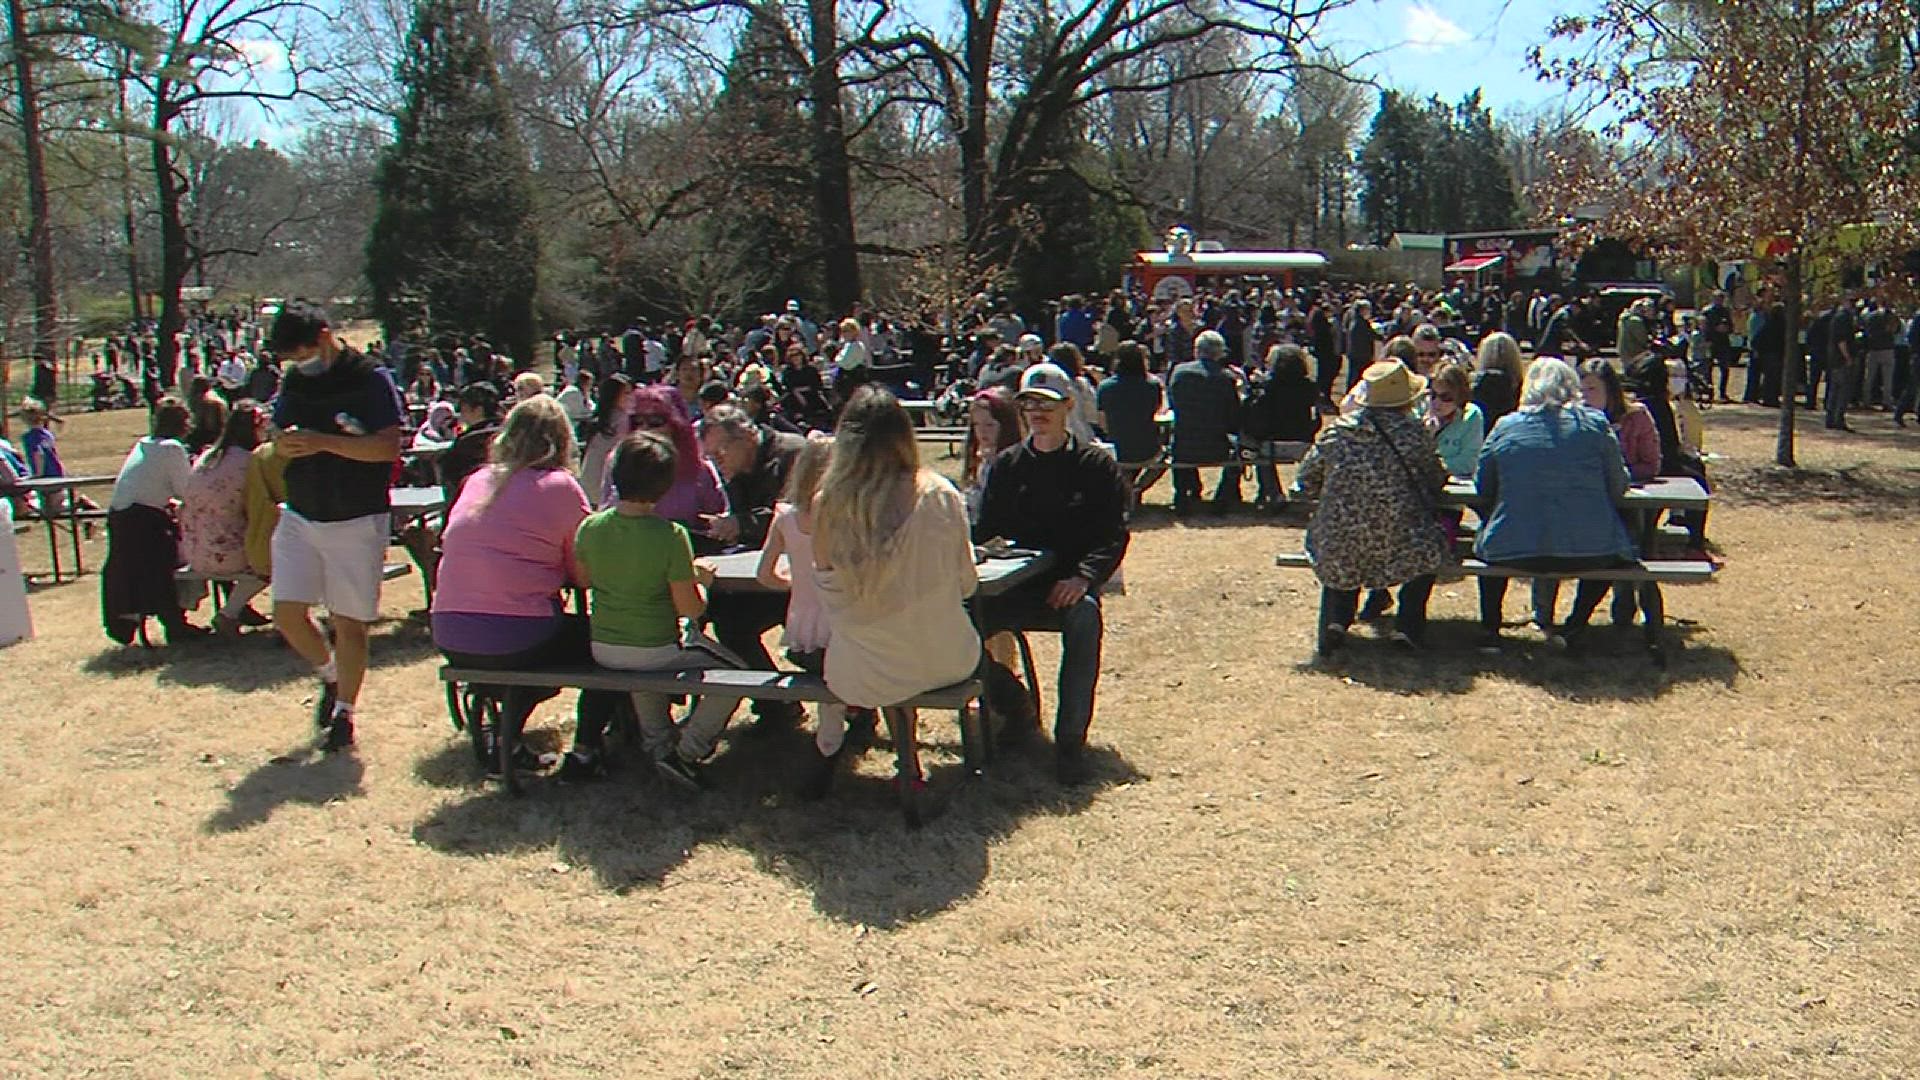 The Memphis Botanic Garden invited people outside to enjoy the spring afternoon Saturday at its annual Cherry Blossom Picnic.